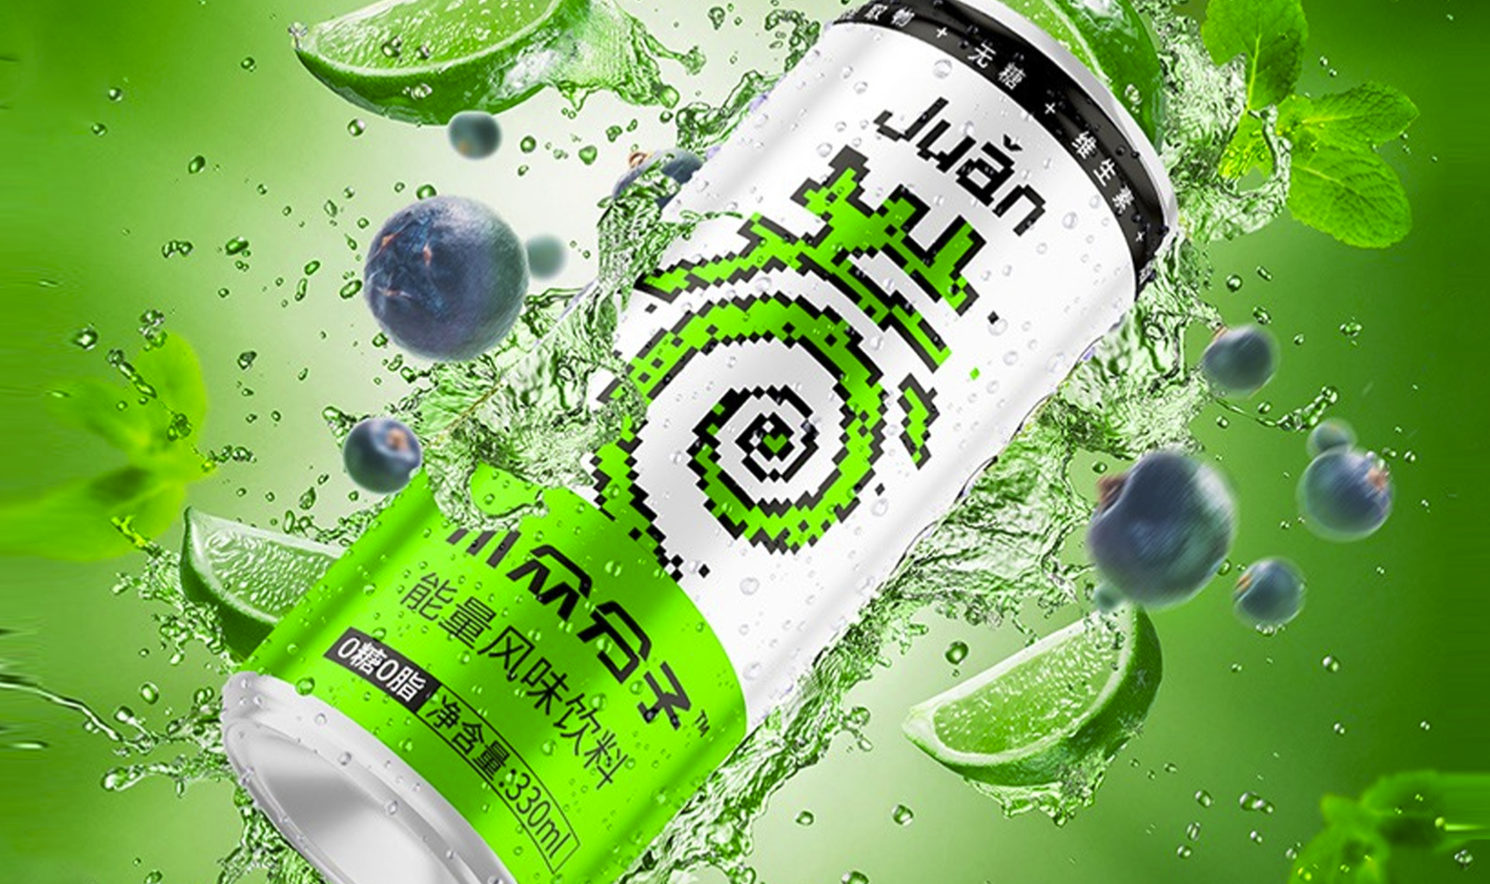 Youth oriented energy drinks